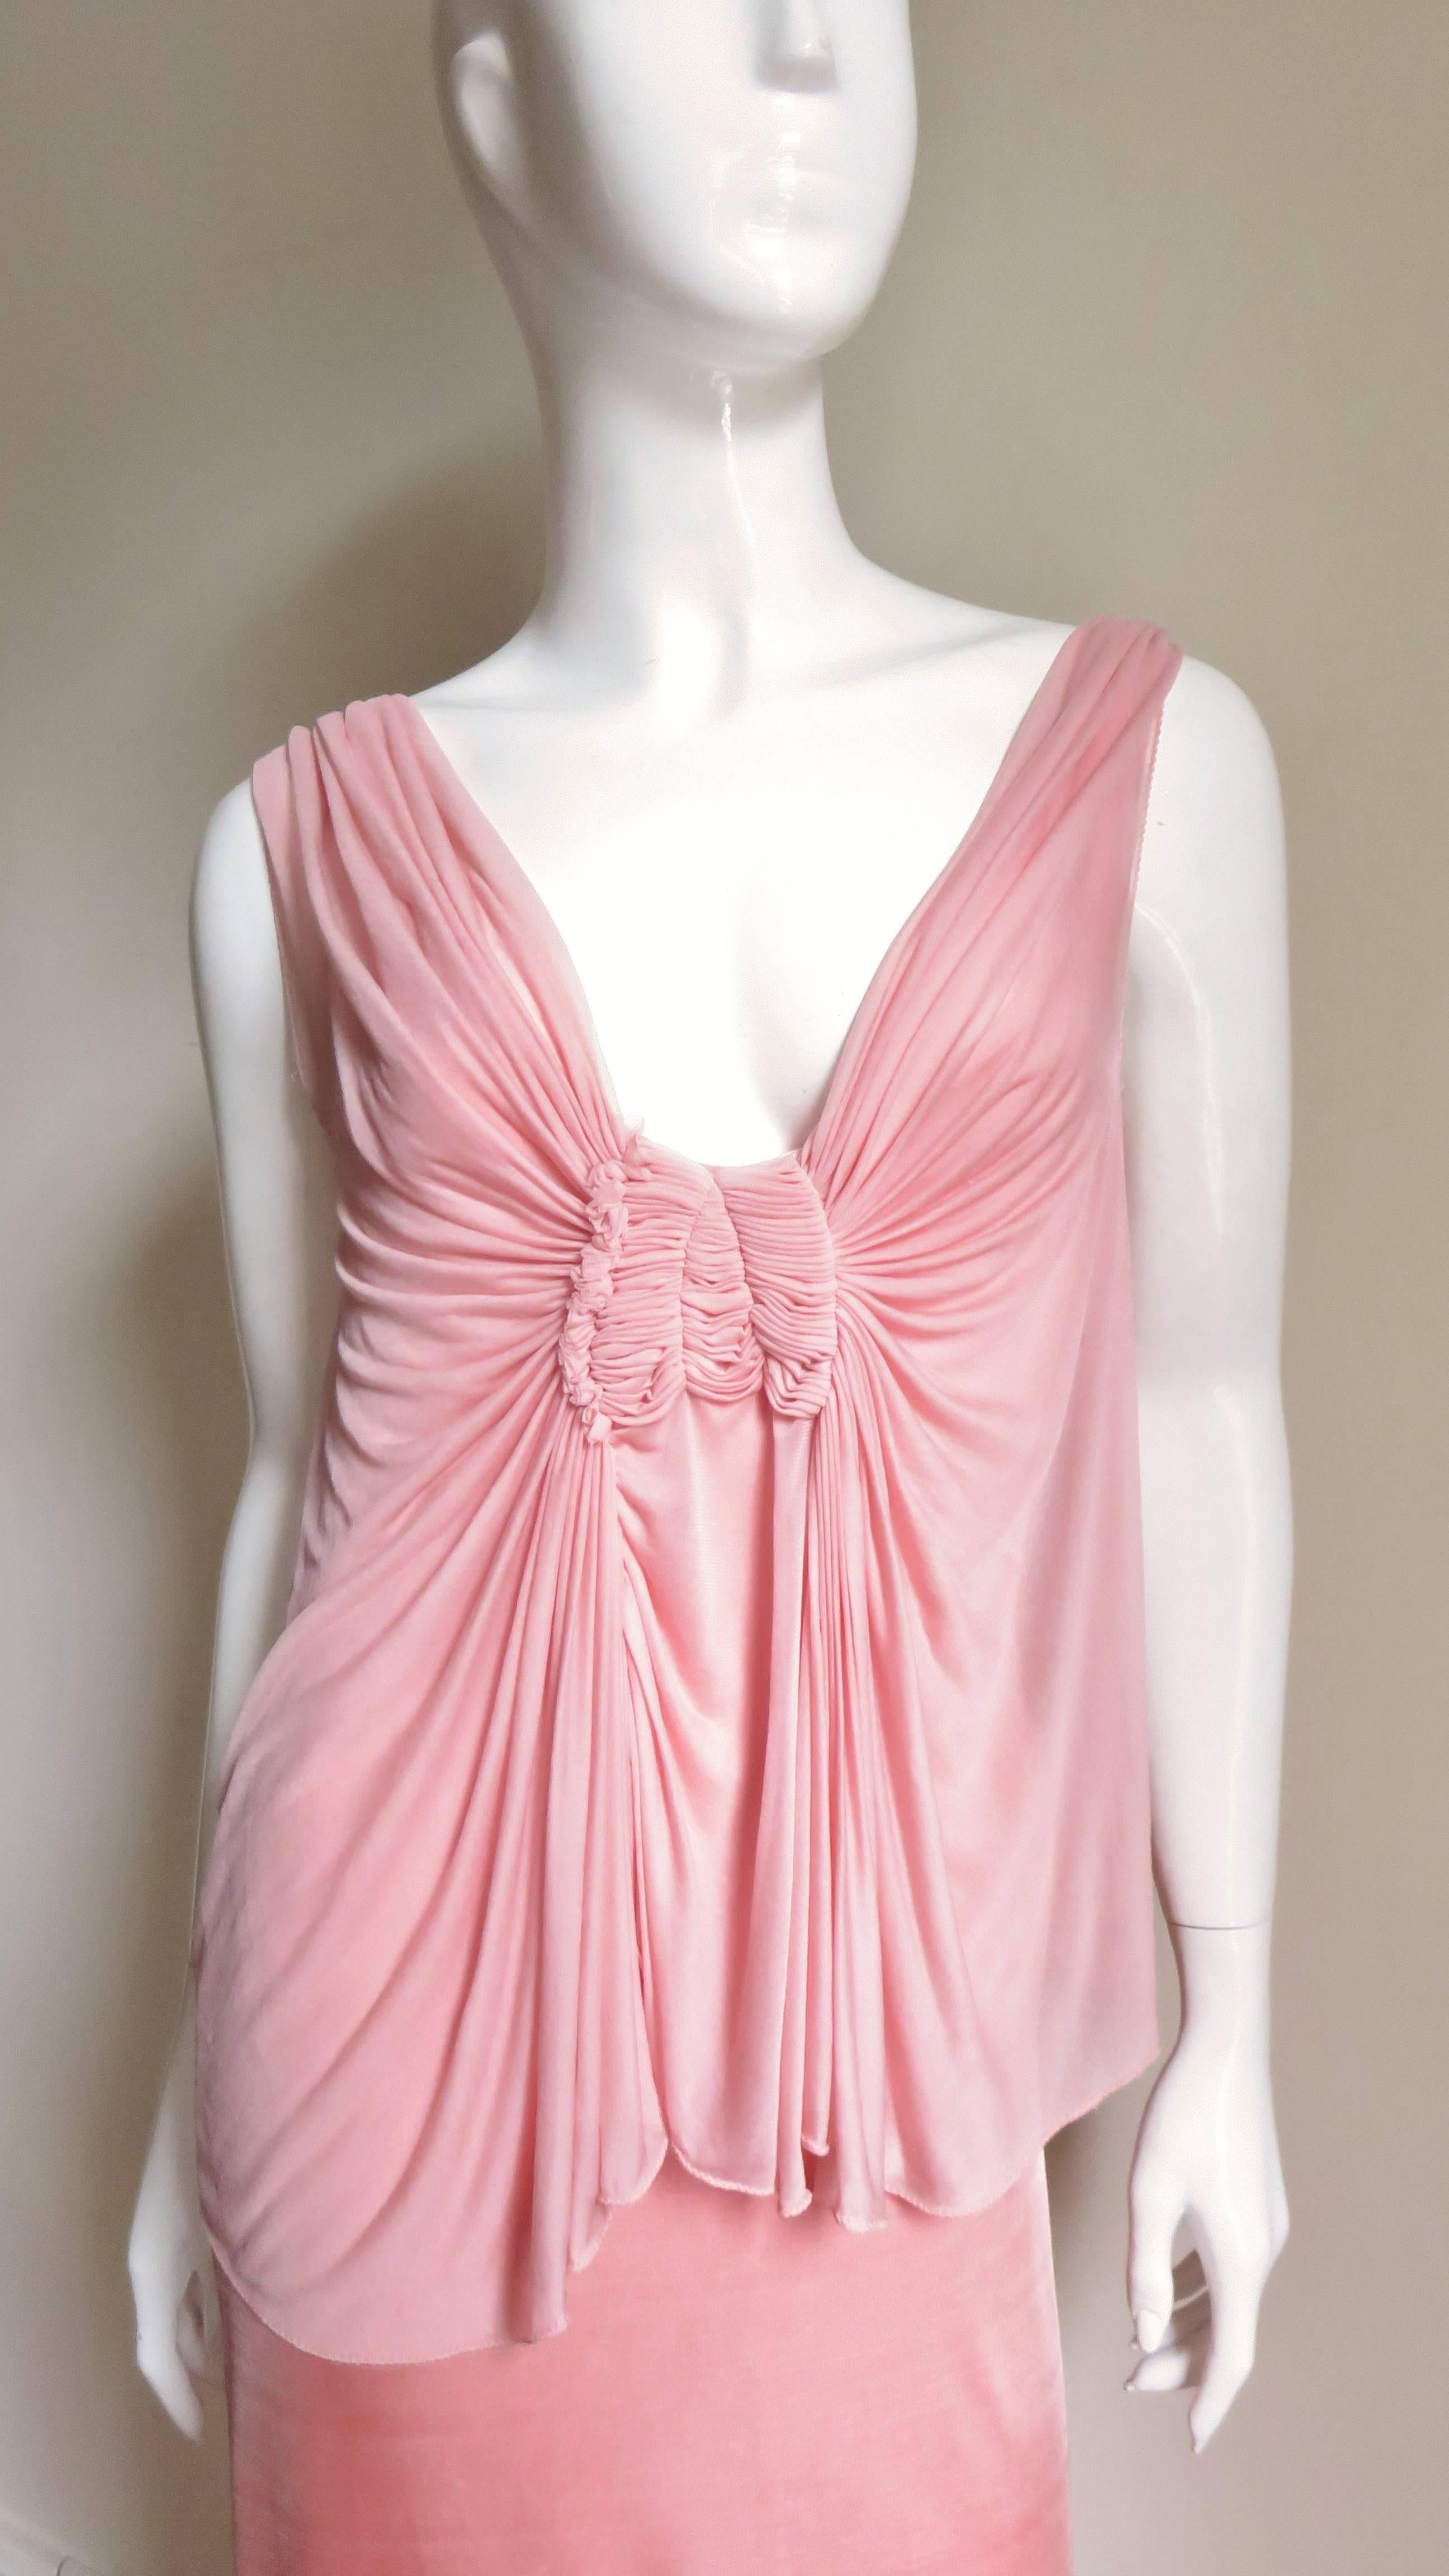 A beautiful fine silk jersey in a lovely shade of pink.  It has a plunging neckline front and back with sheer ethereal draping at the back shoulders.  The ruched front bodice all gathers into an elaborate ruched panel at the base of the neckline. It